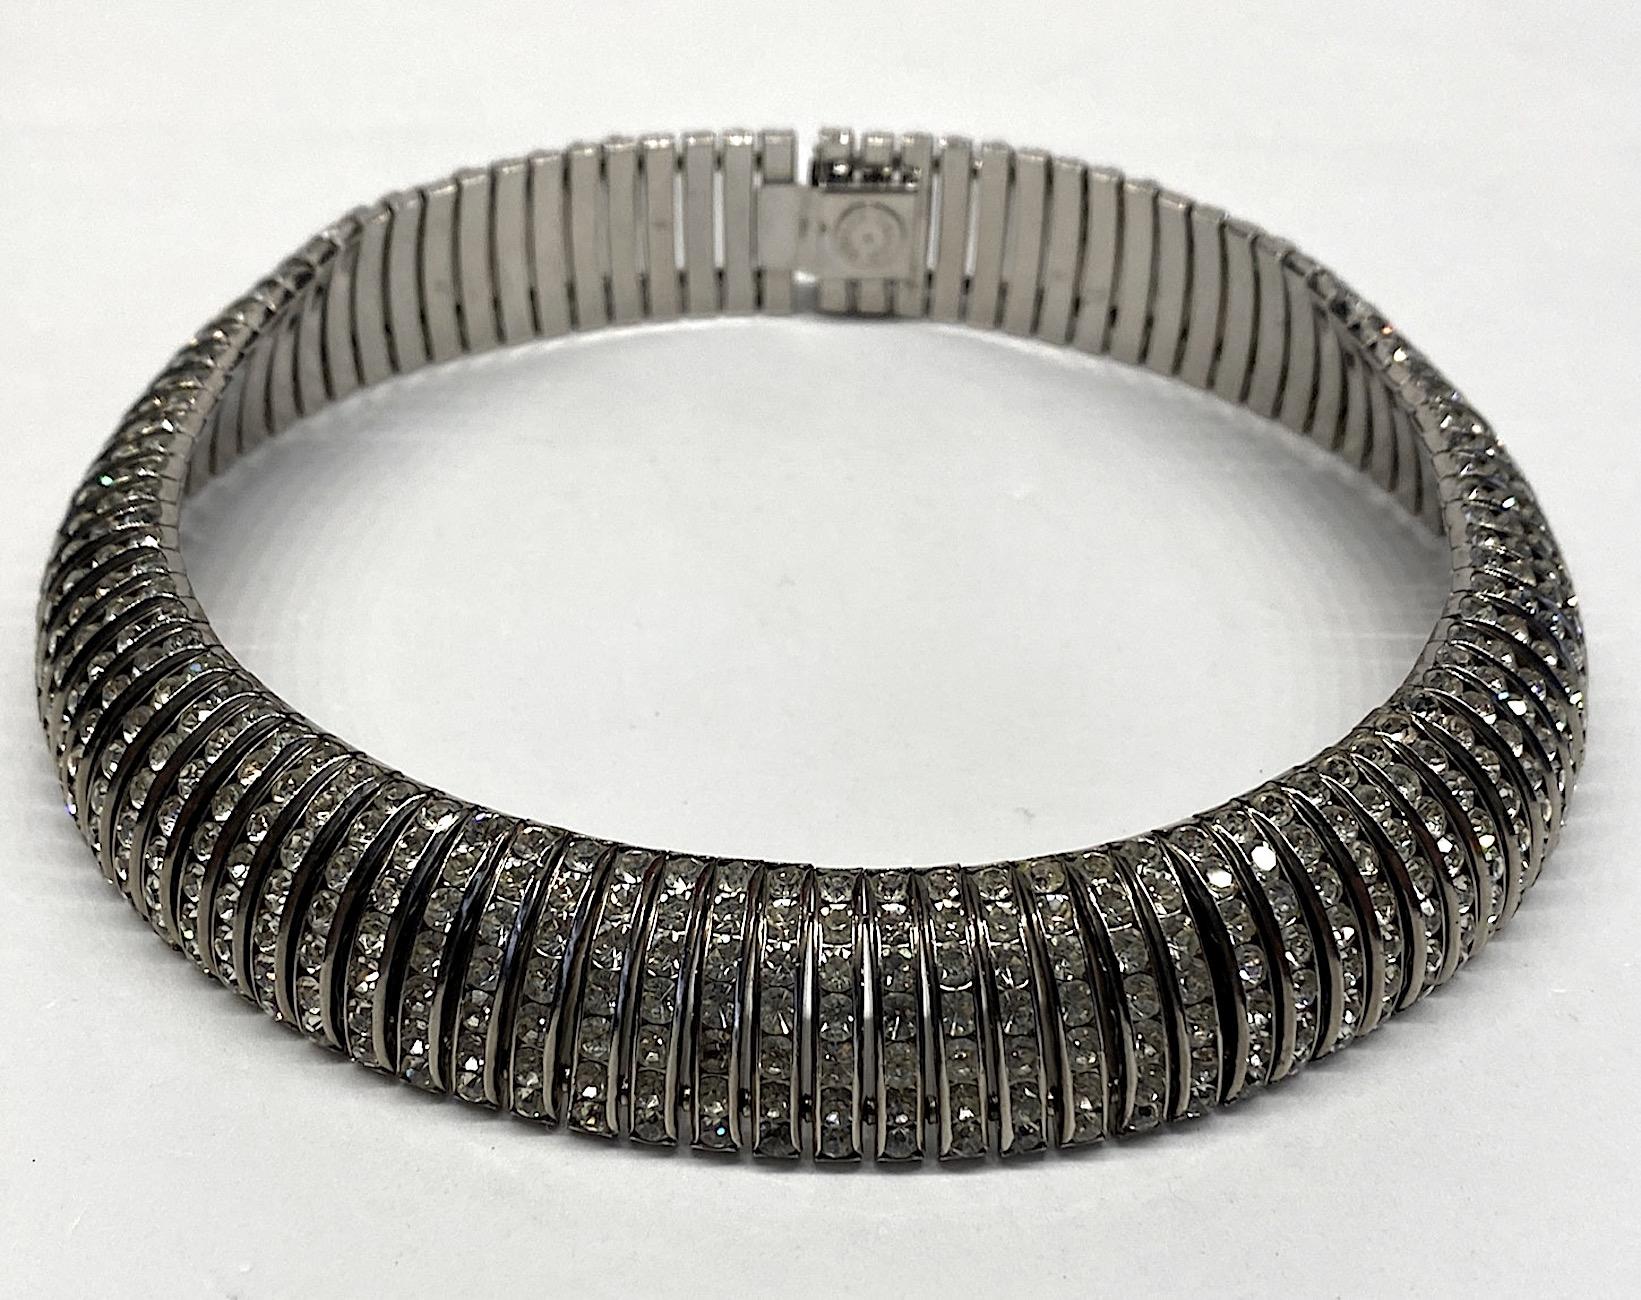 A truly chic rhinestone collar by English company Butler & Wilson from the 1980s. The design is a 1930s machine age Art Deco style. The necklace is comprised of rhodium plated 1 inches long links. Each link is channel set with 7 round rhinestones